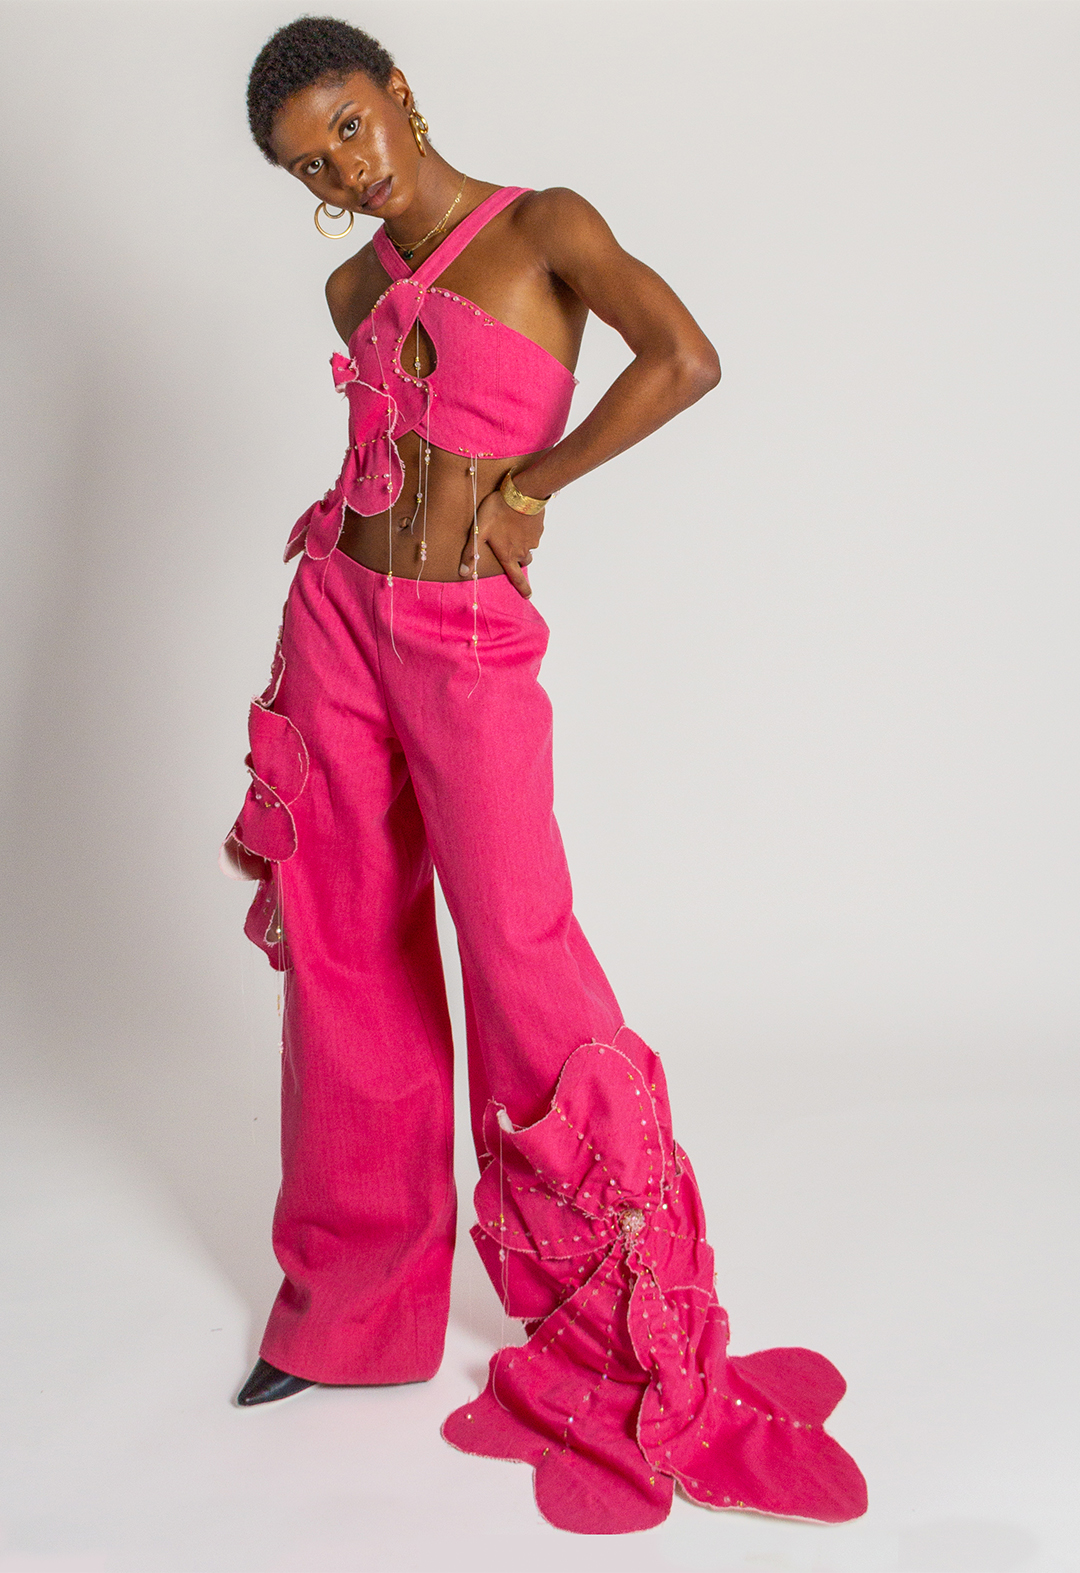 Pink beaded floral denim top paired with pink denim pants, with ruched beaded flower appliqués.